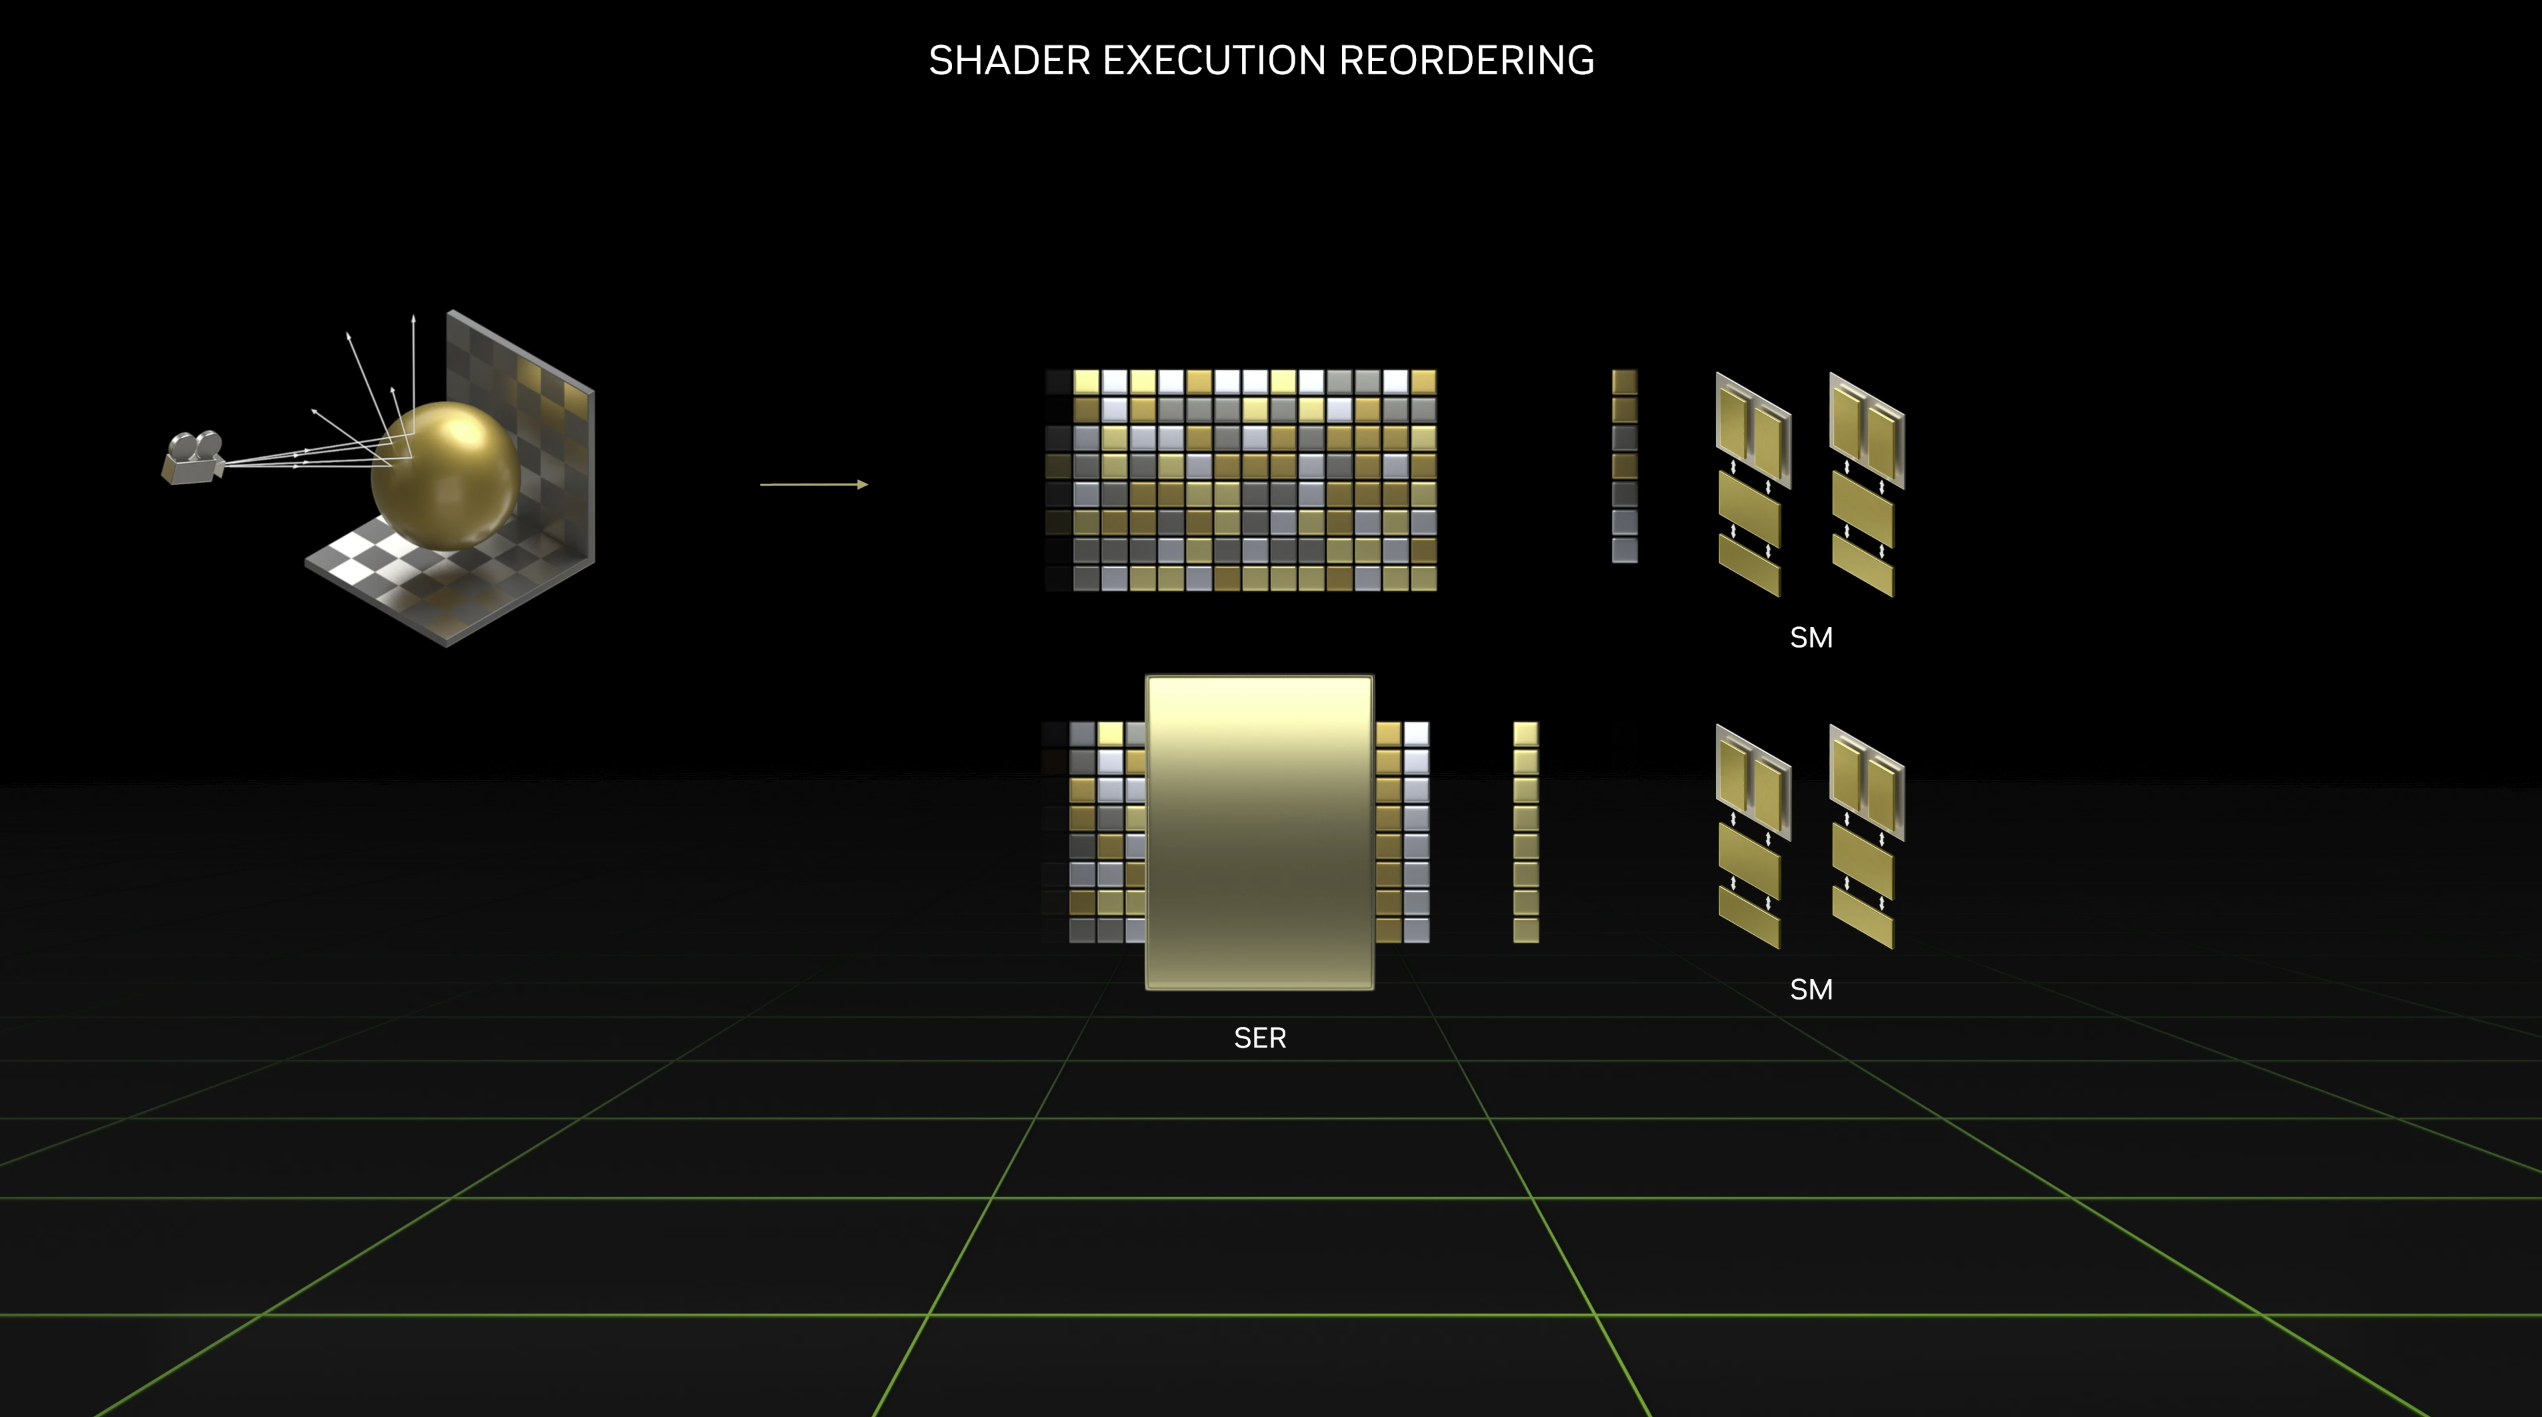 Image showing that Shader Execution Reordering improves shader performance by up to 2x, and in-game frame rates by up to 25%.